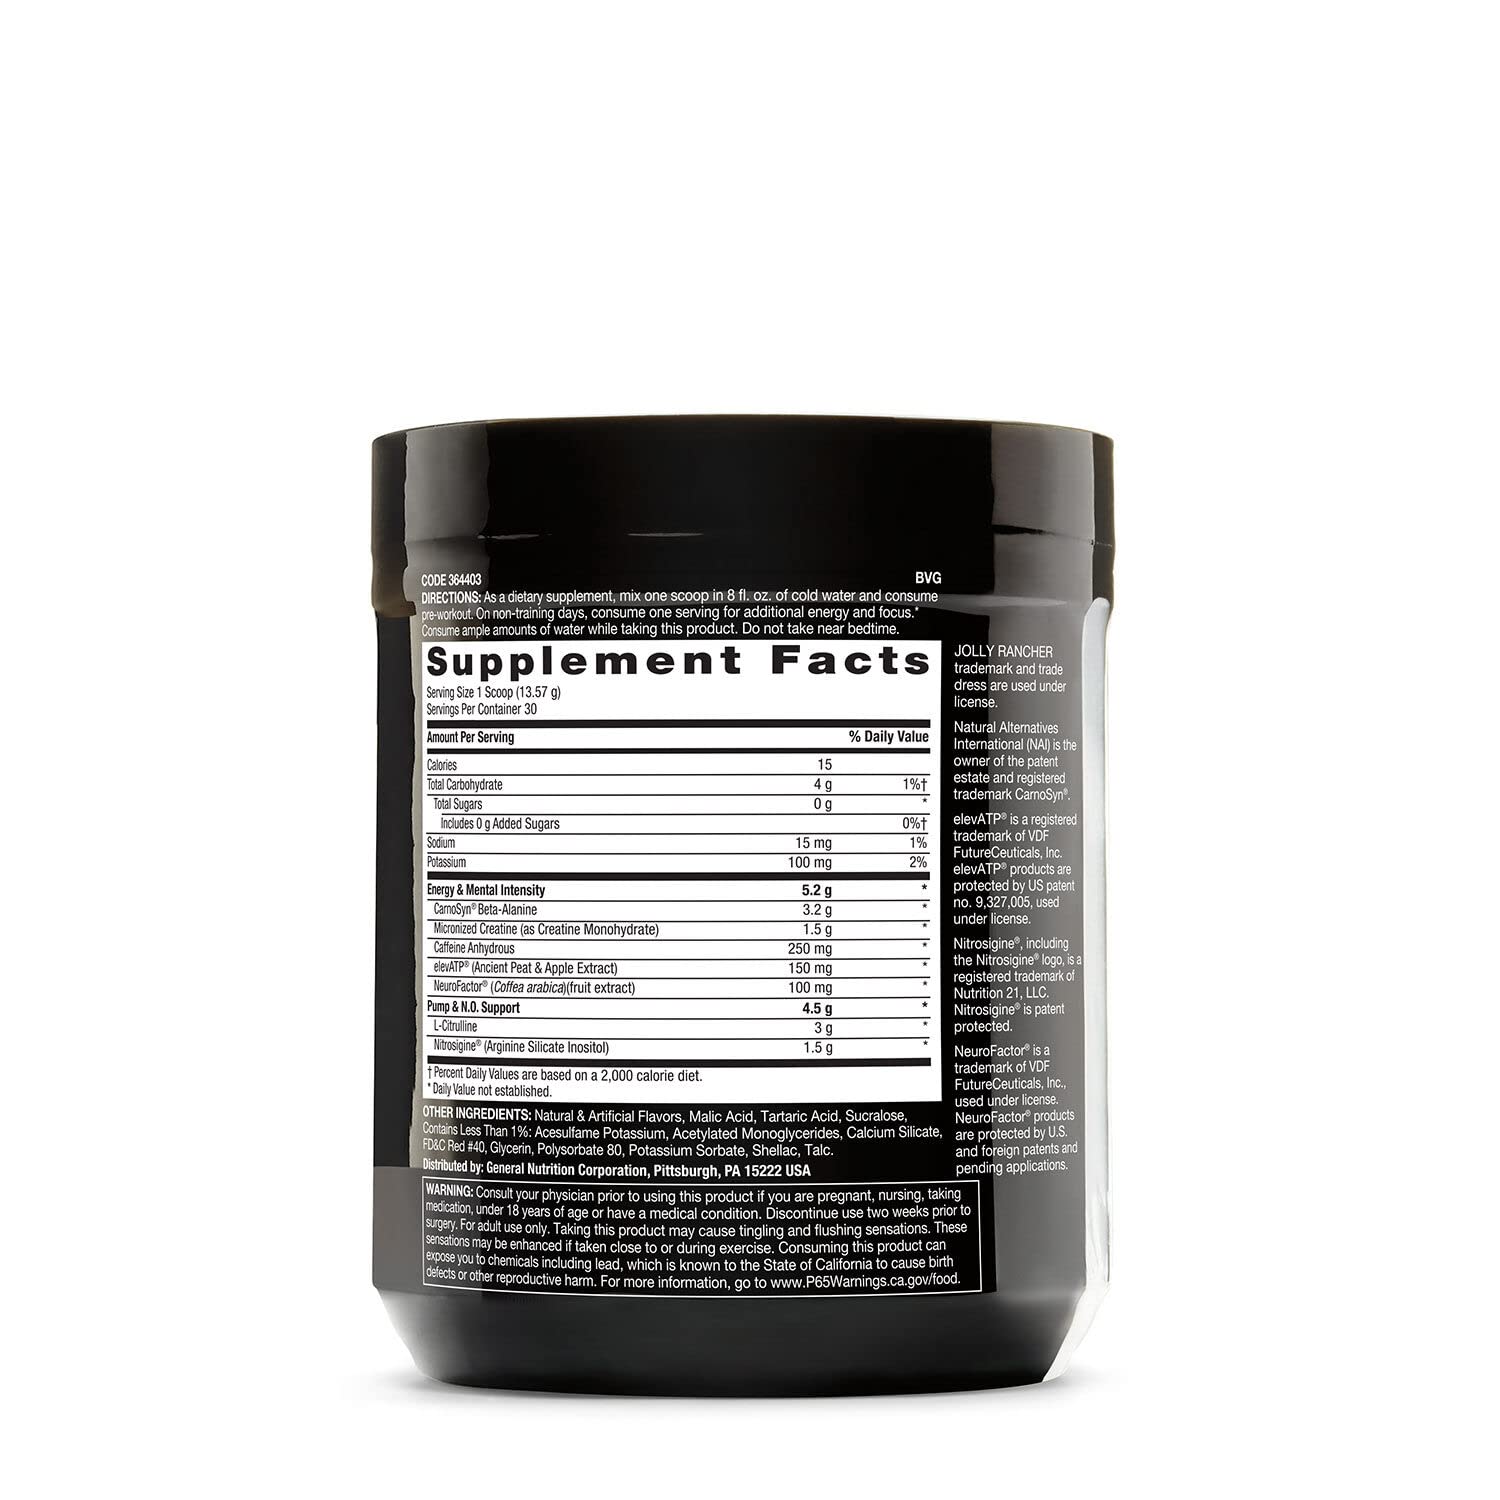 BEYOND RAW LIT | Clinically Dosed Pre-Workout Powder | Contains Caffeine, L-Citrulline, and Beta-Alanine, Nitric Oxide and Preworkout Supplement | Jolly Rancher Watermelon | 30 Servings